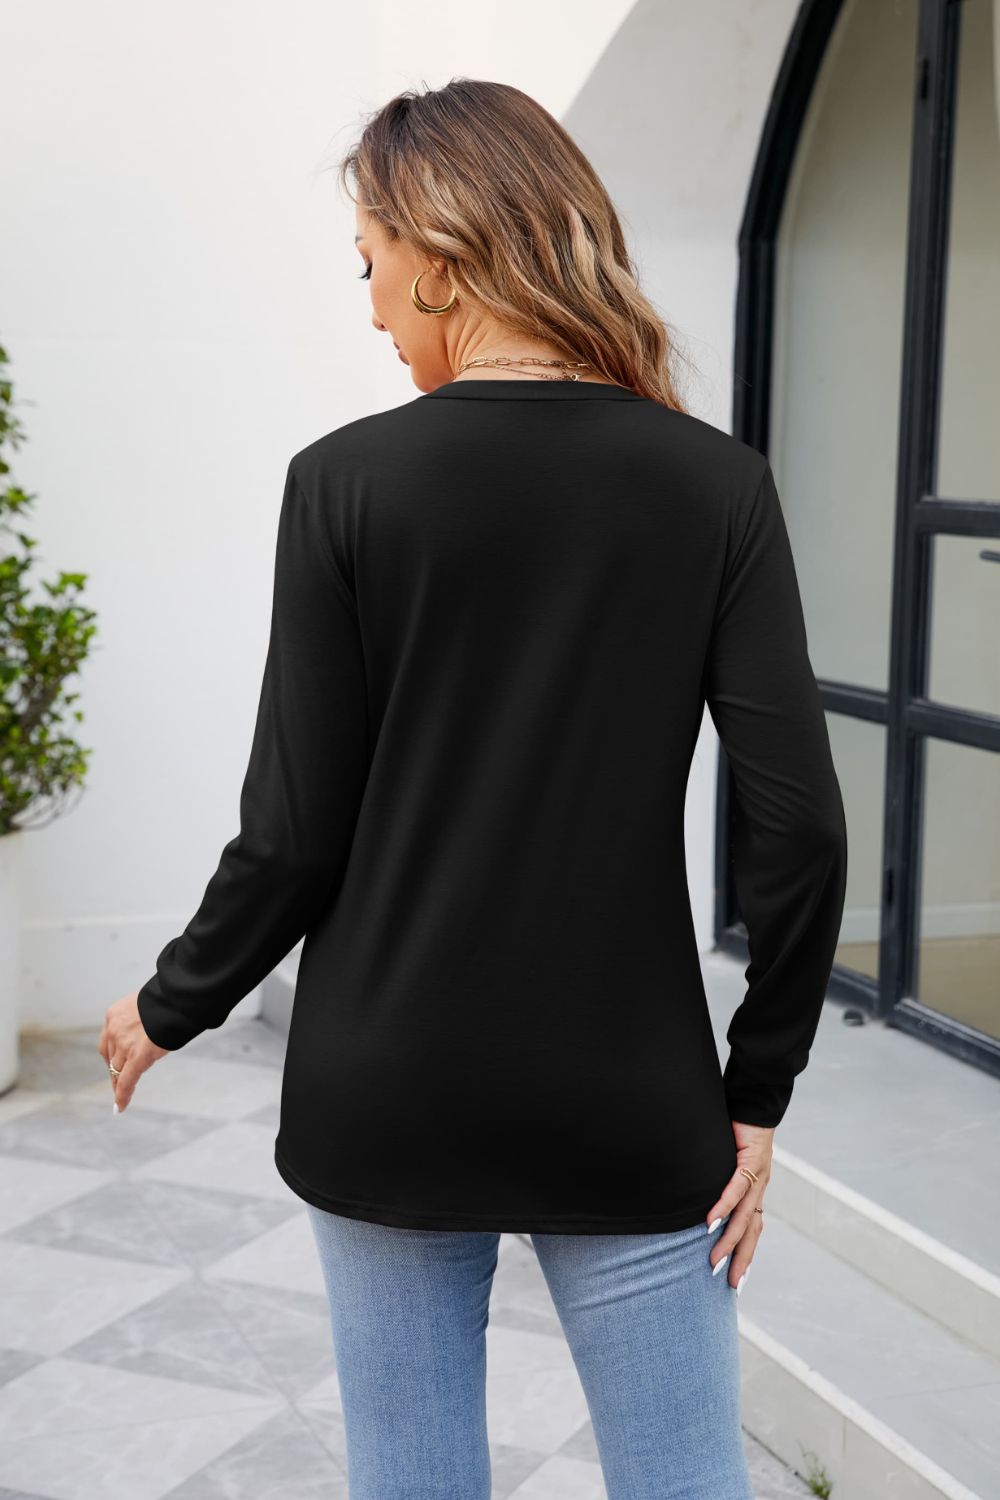 V-Neck Ruched Long Sleeve Blouse - Women’s Clothing & Accessories - Shirts & Tops - 9 - 2024